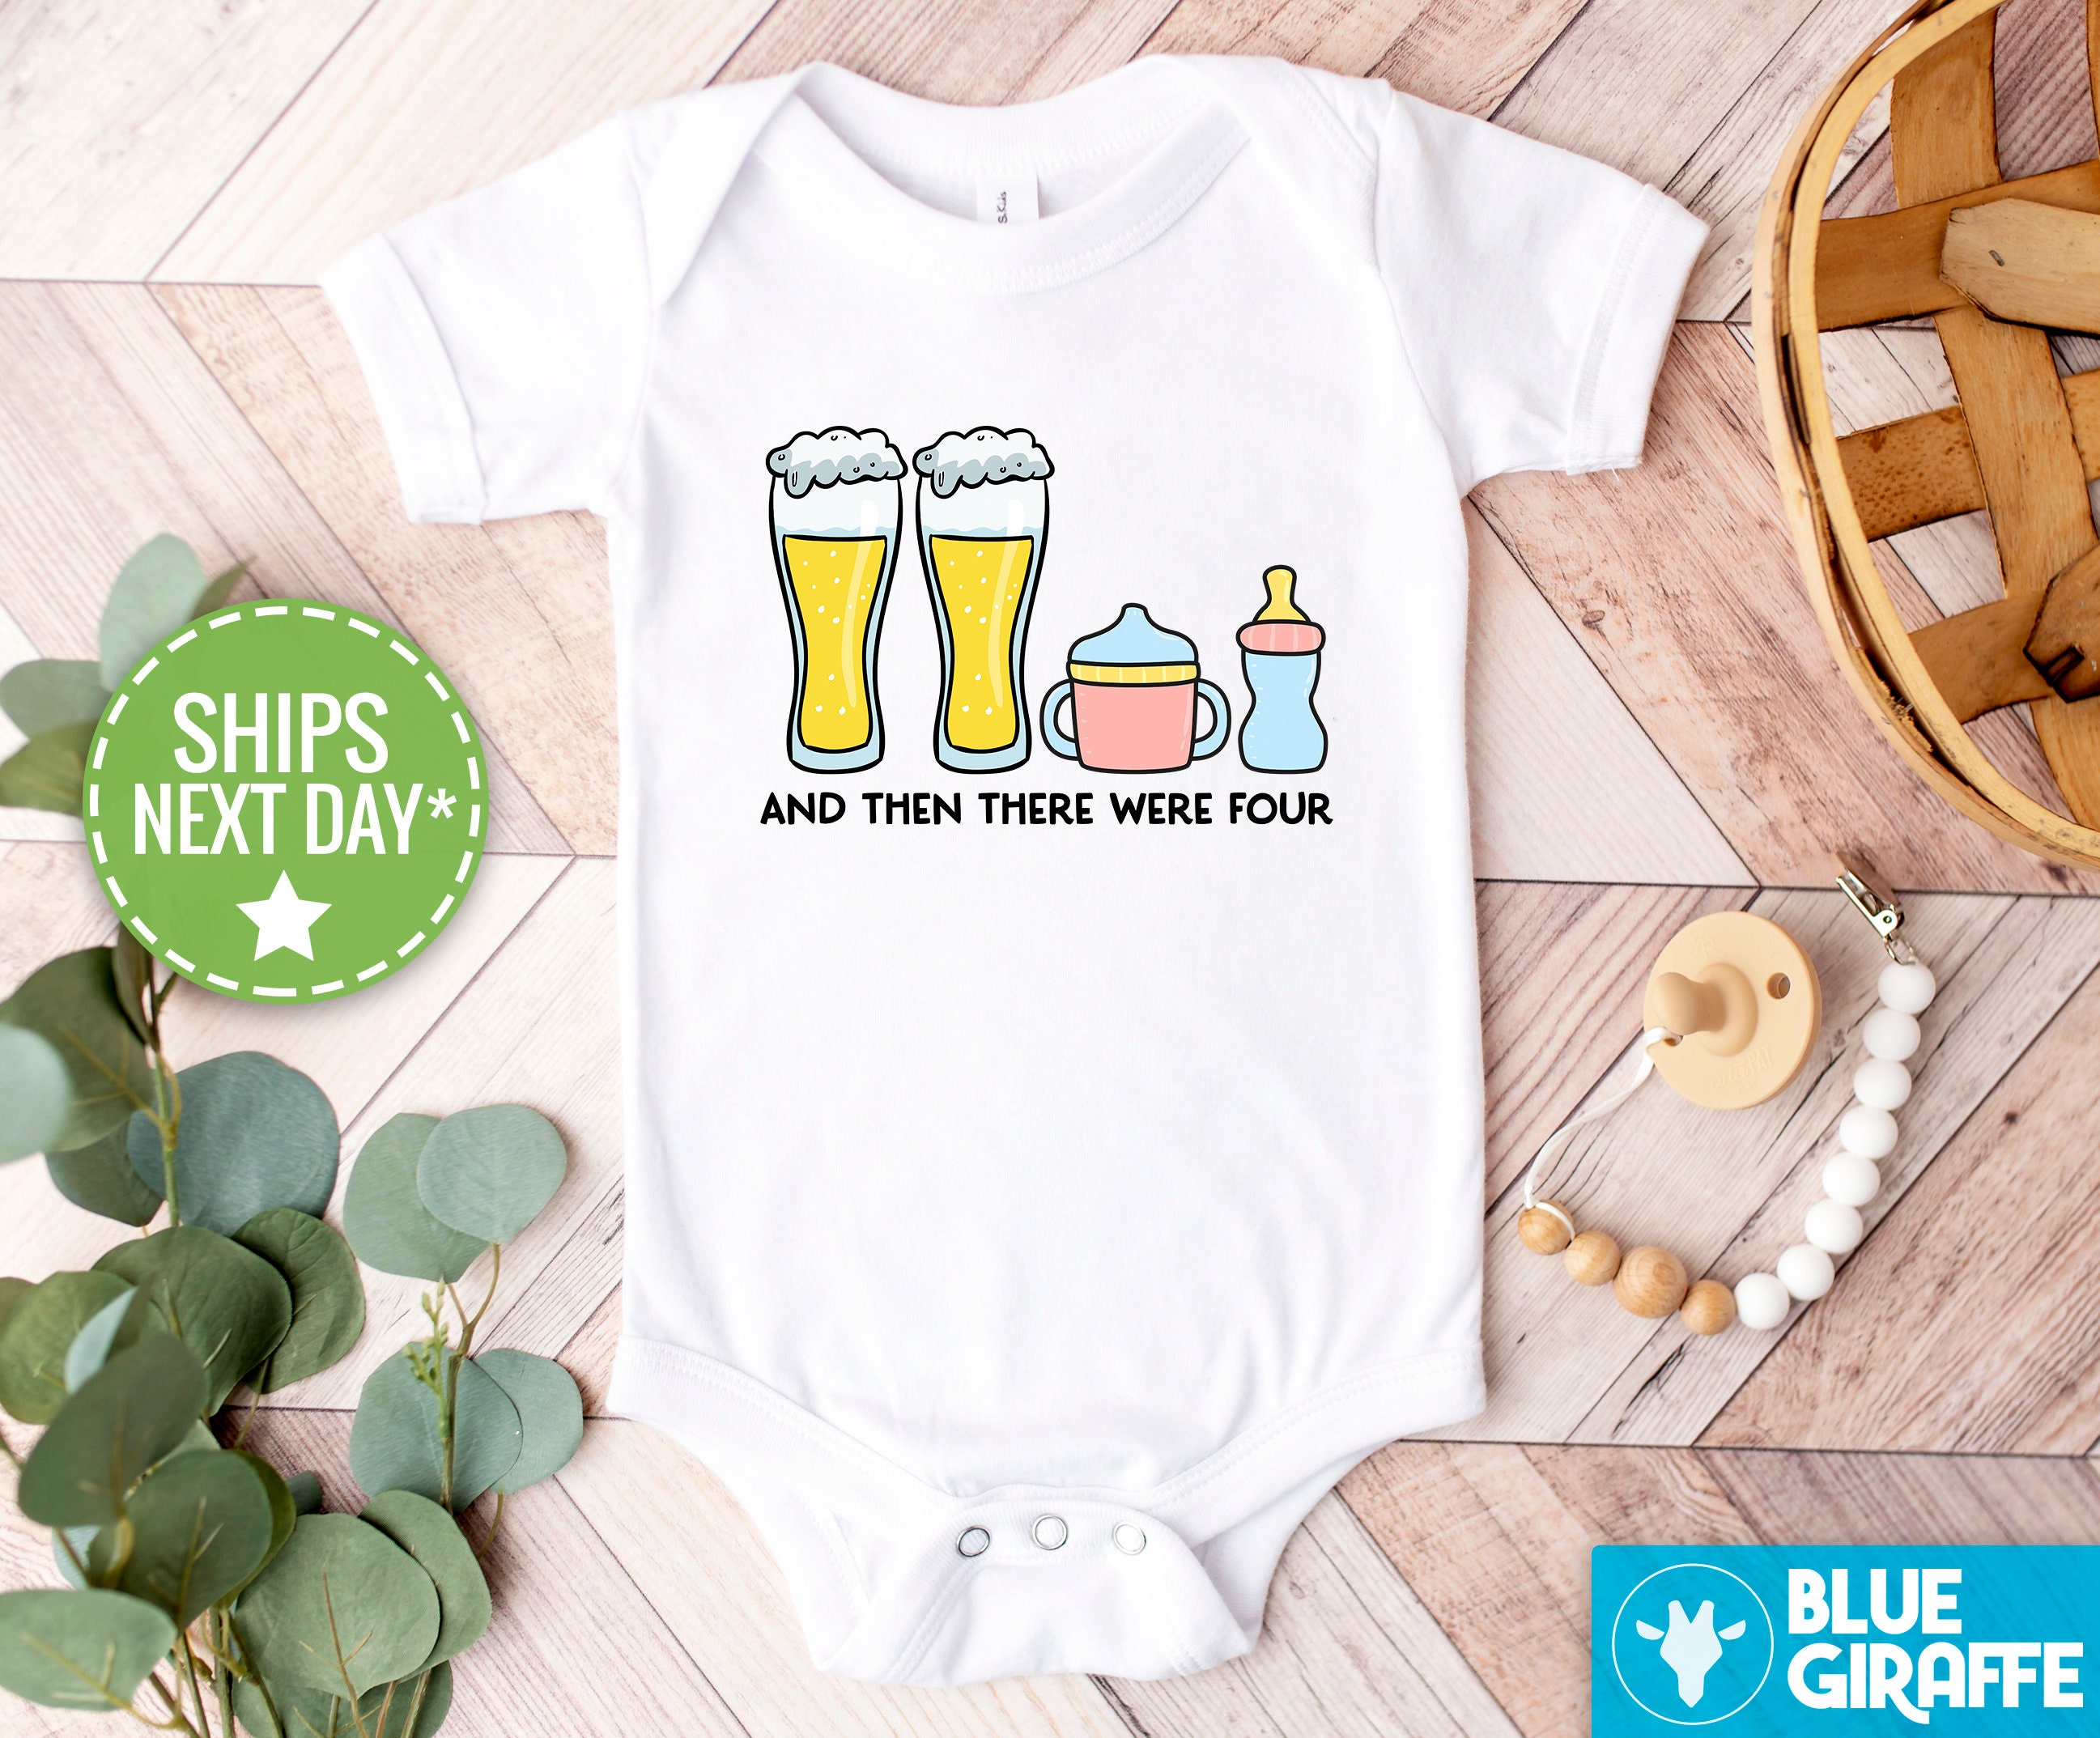 And Then There Were Four Baby Announcement – Eleven27 Tees